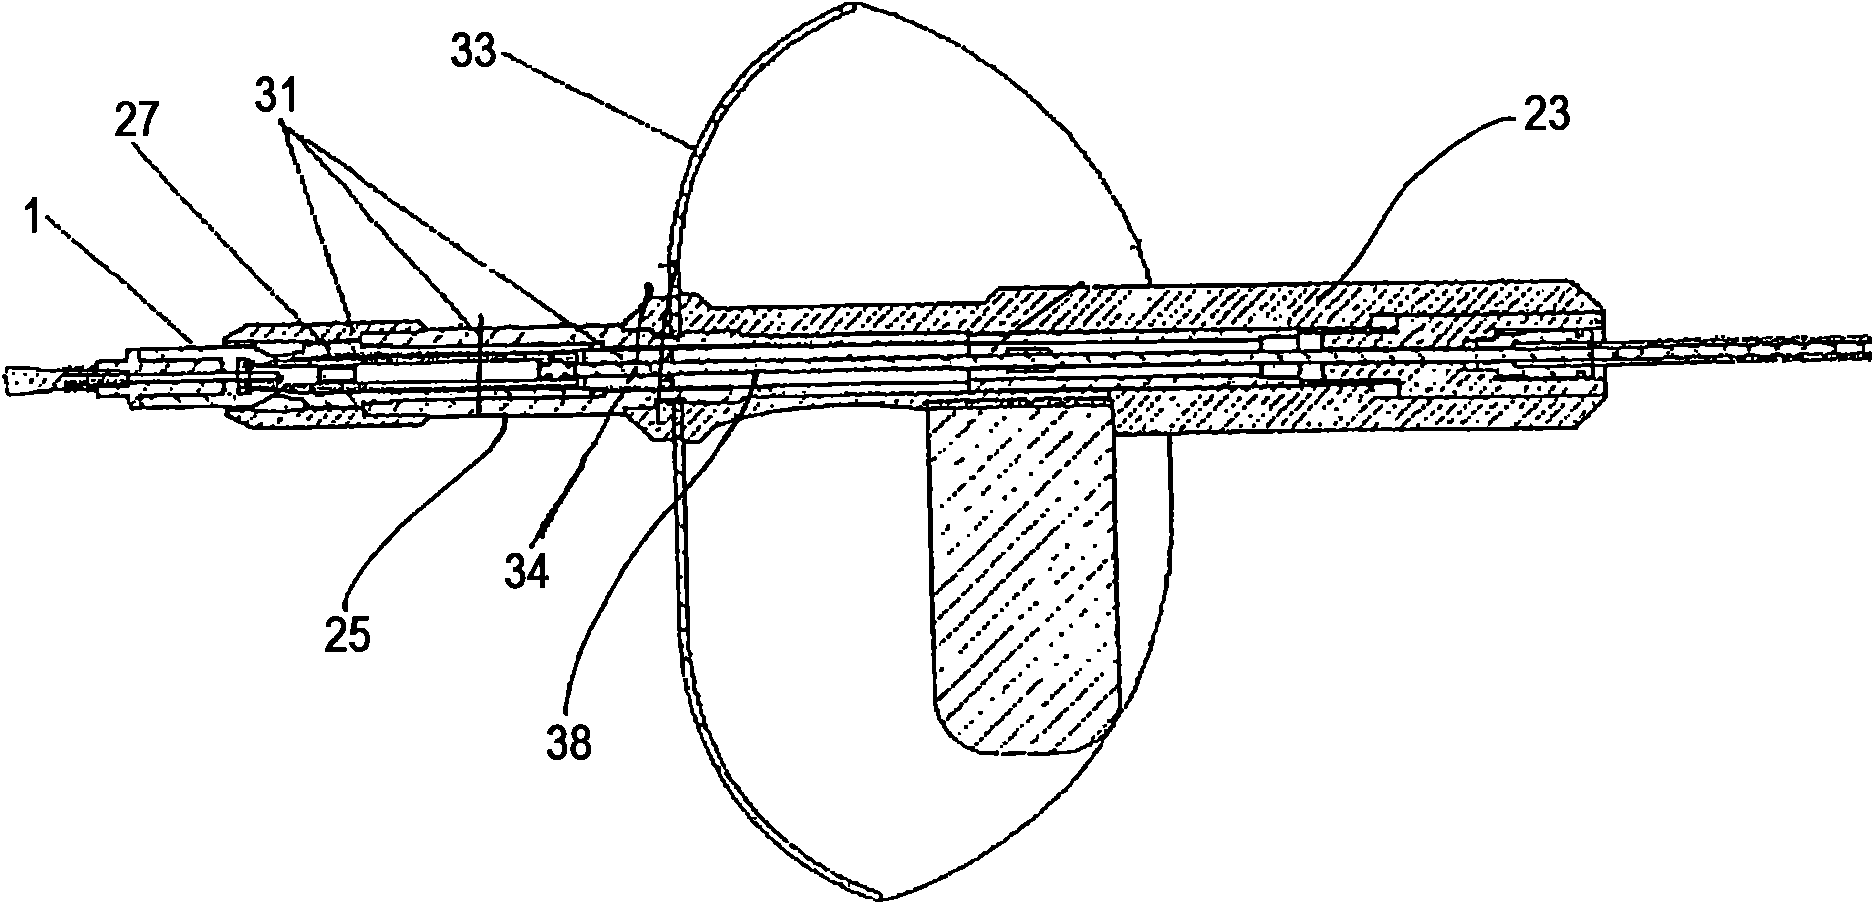 Applicator for applying a radioactive substance to a biological tissue